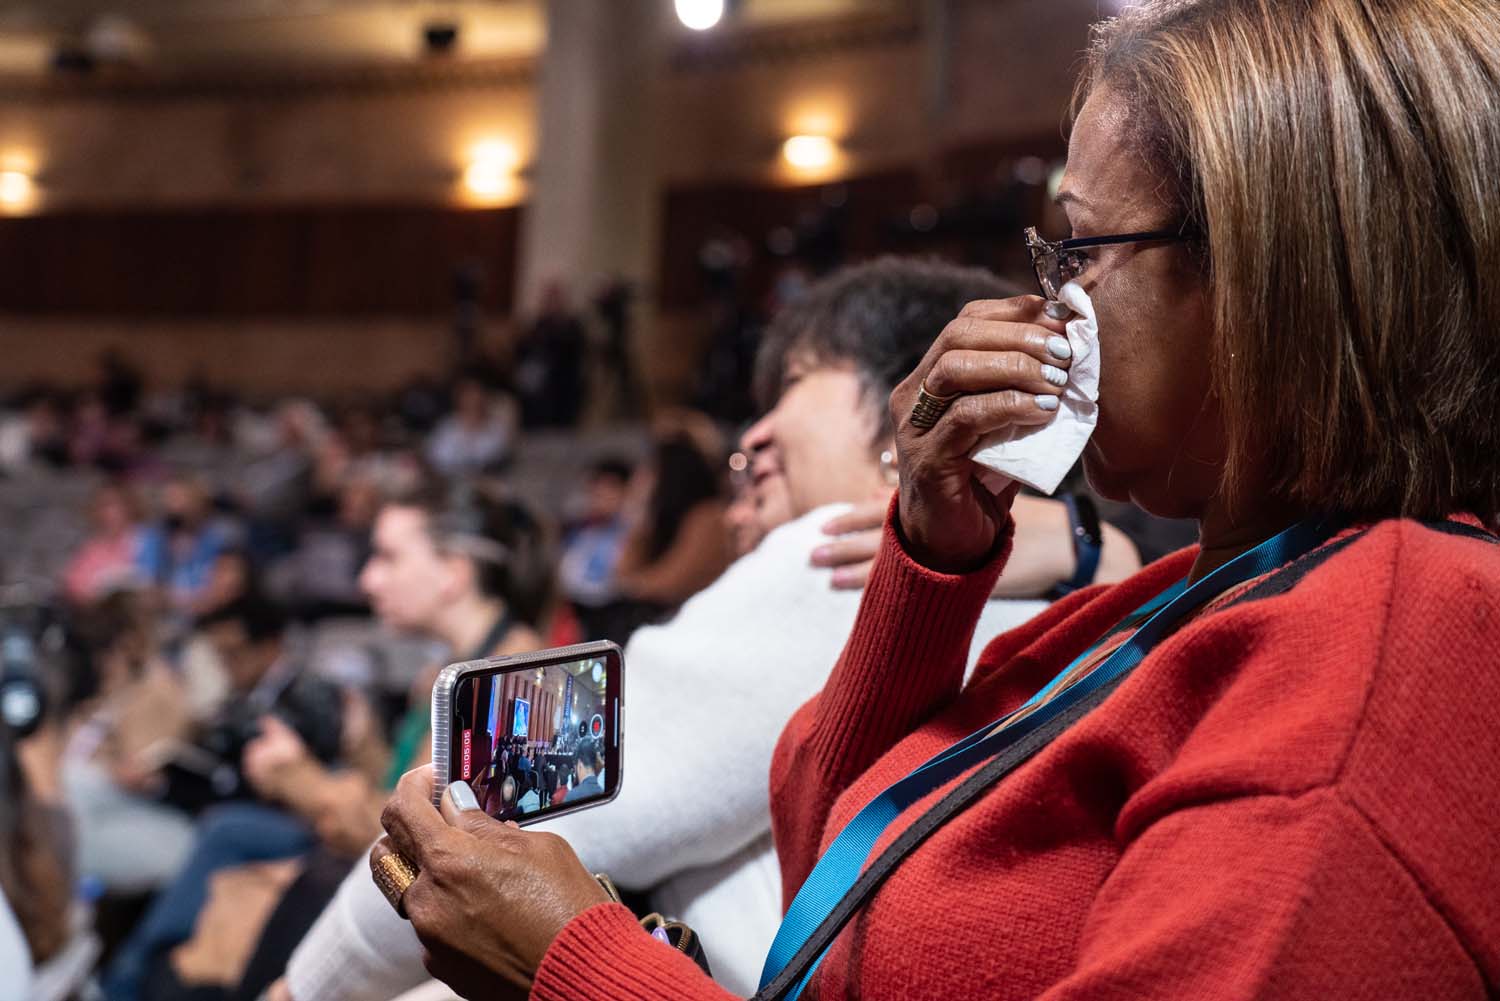 A woman sits in the audience, recording the hearing on her cell phone and wiping away tears with a tissue.